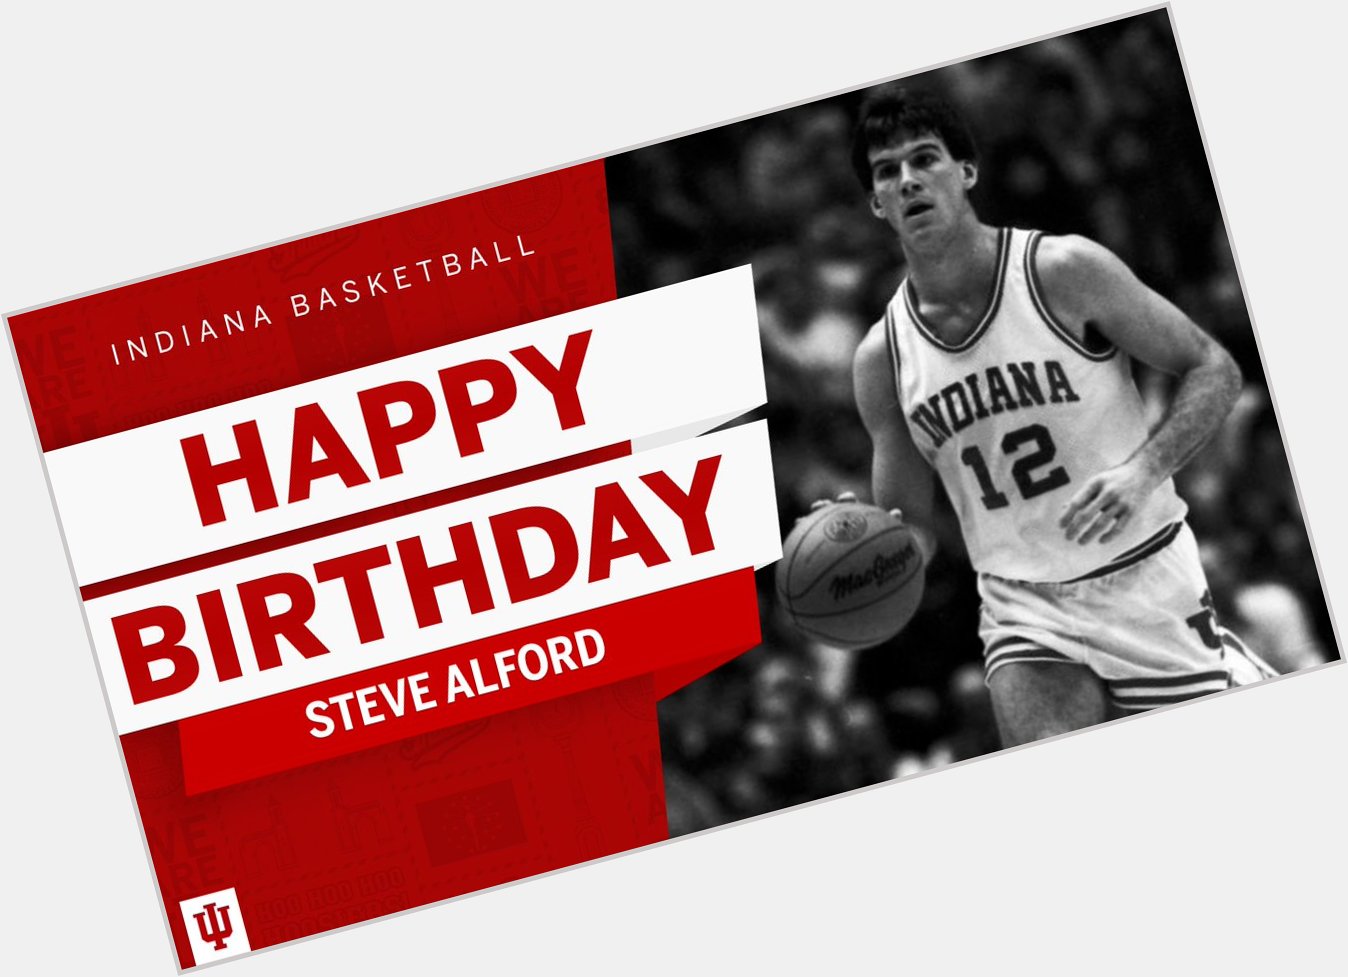 Wishing a Happy Birthday to Steve Alford and Todd Leary today! 